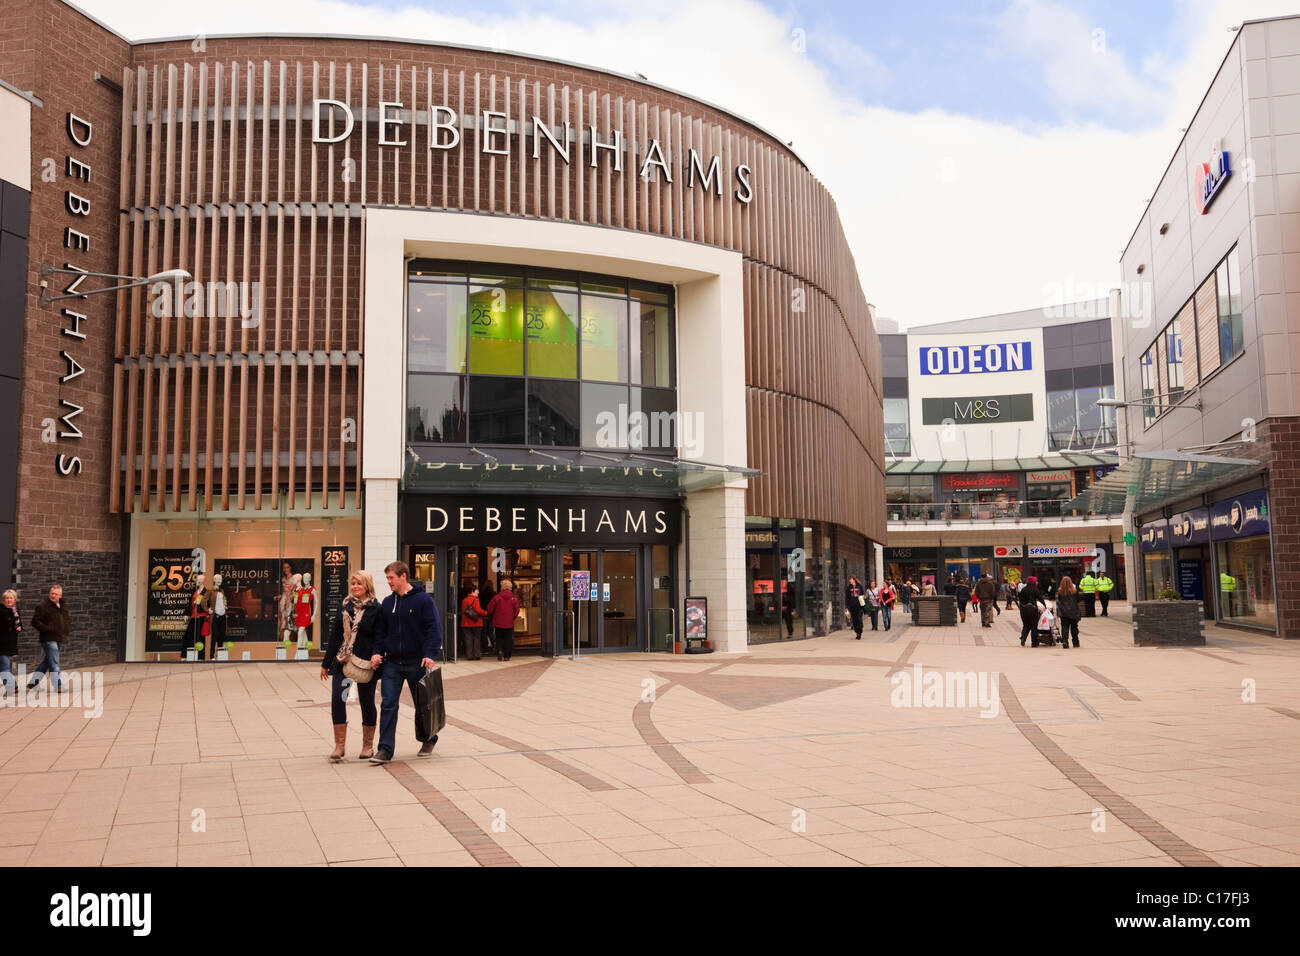 Debenhams department store at Eagles Meadow shopping centre with people shoppers in the precinct. Wrexham, Flintshire, North Wales, UK, Britain Stock Photo